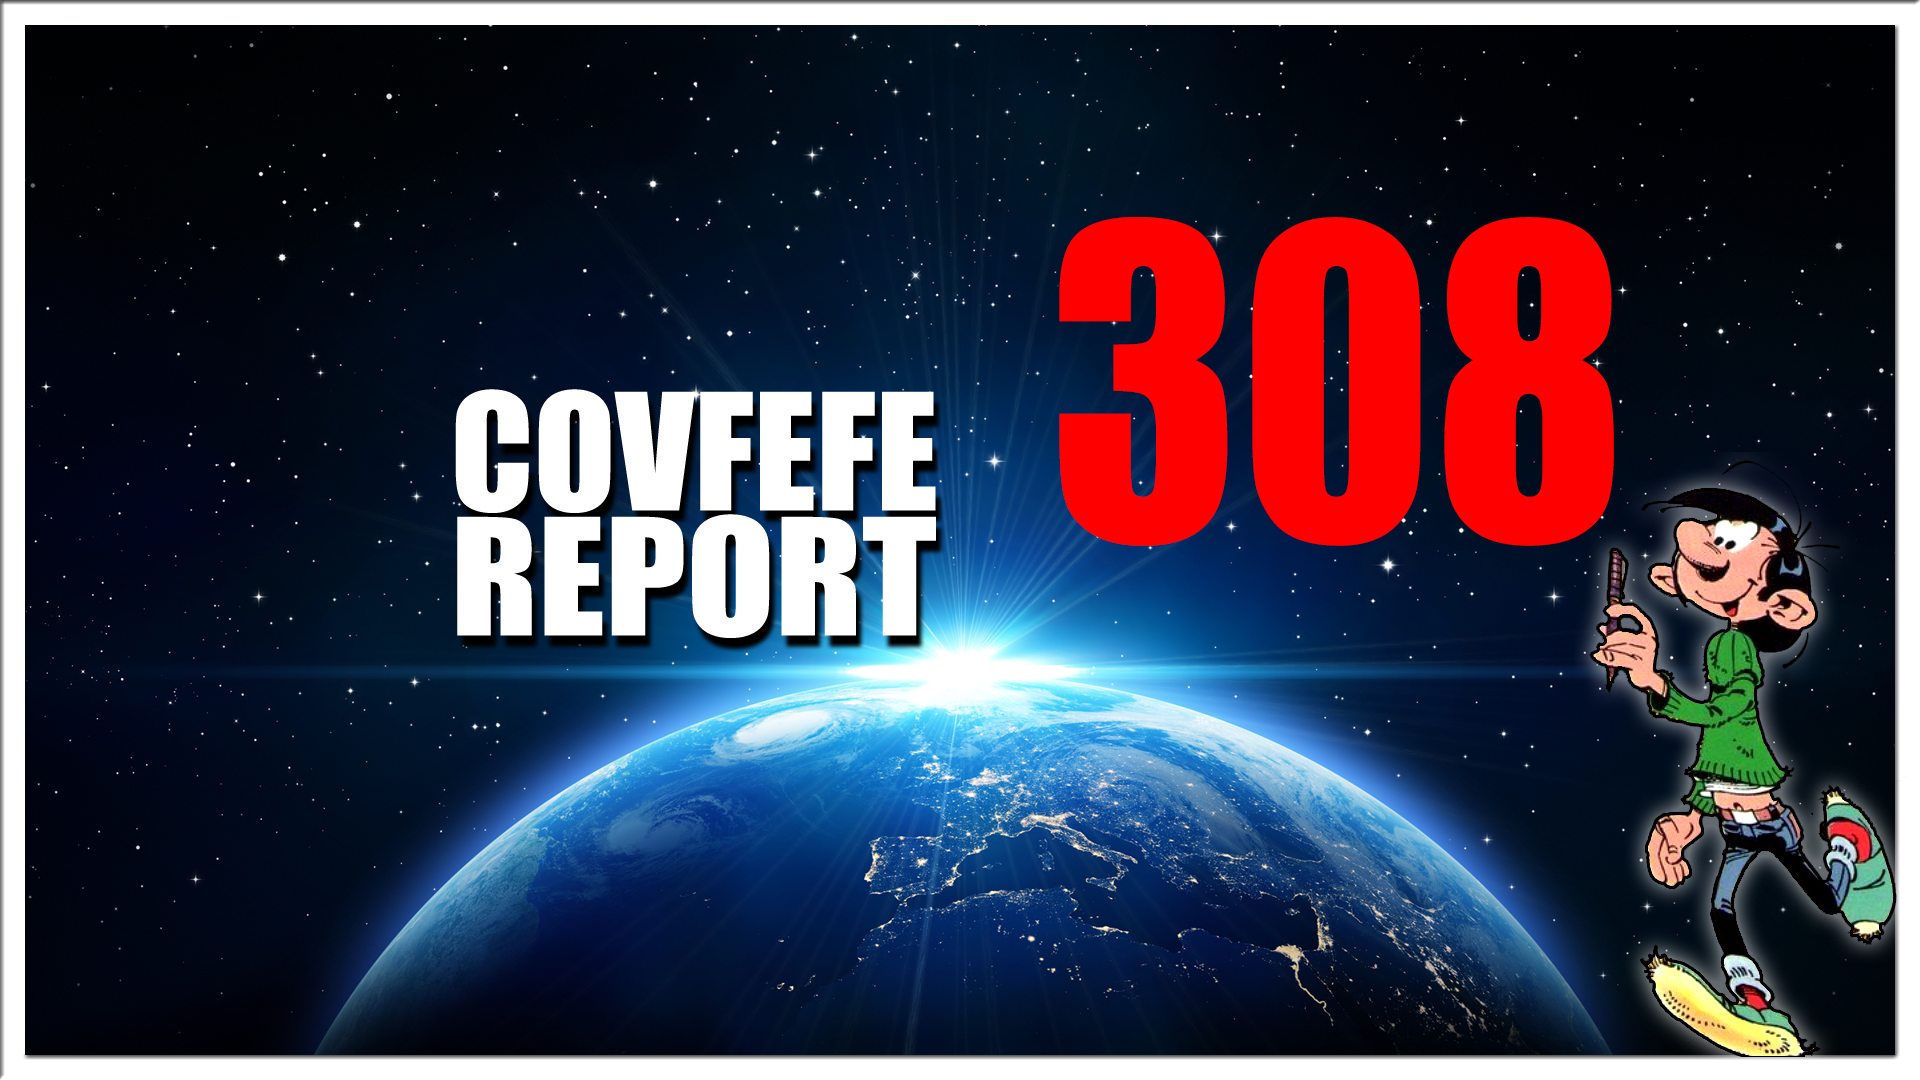 Covfefe Report 308.  Nothing is ever truly deleted, Q-anonNederland discord server down - Wat nu